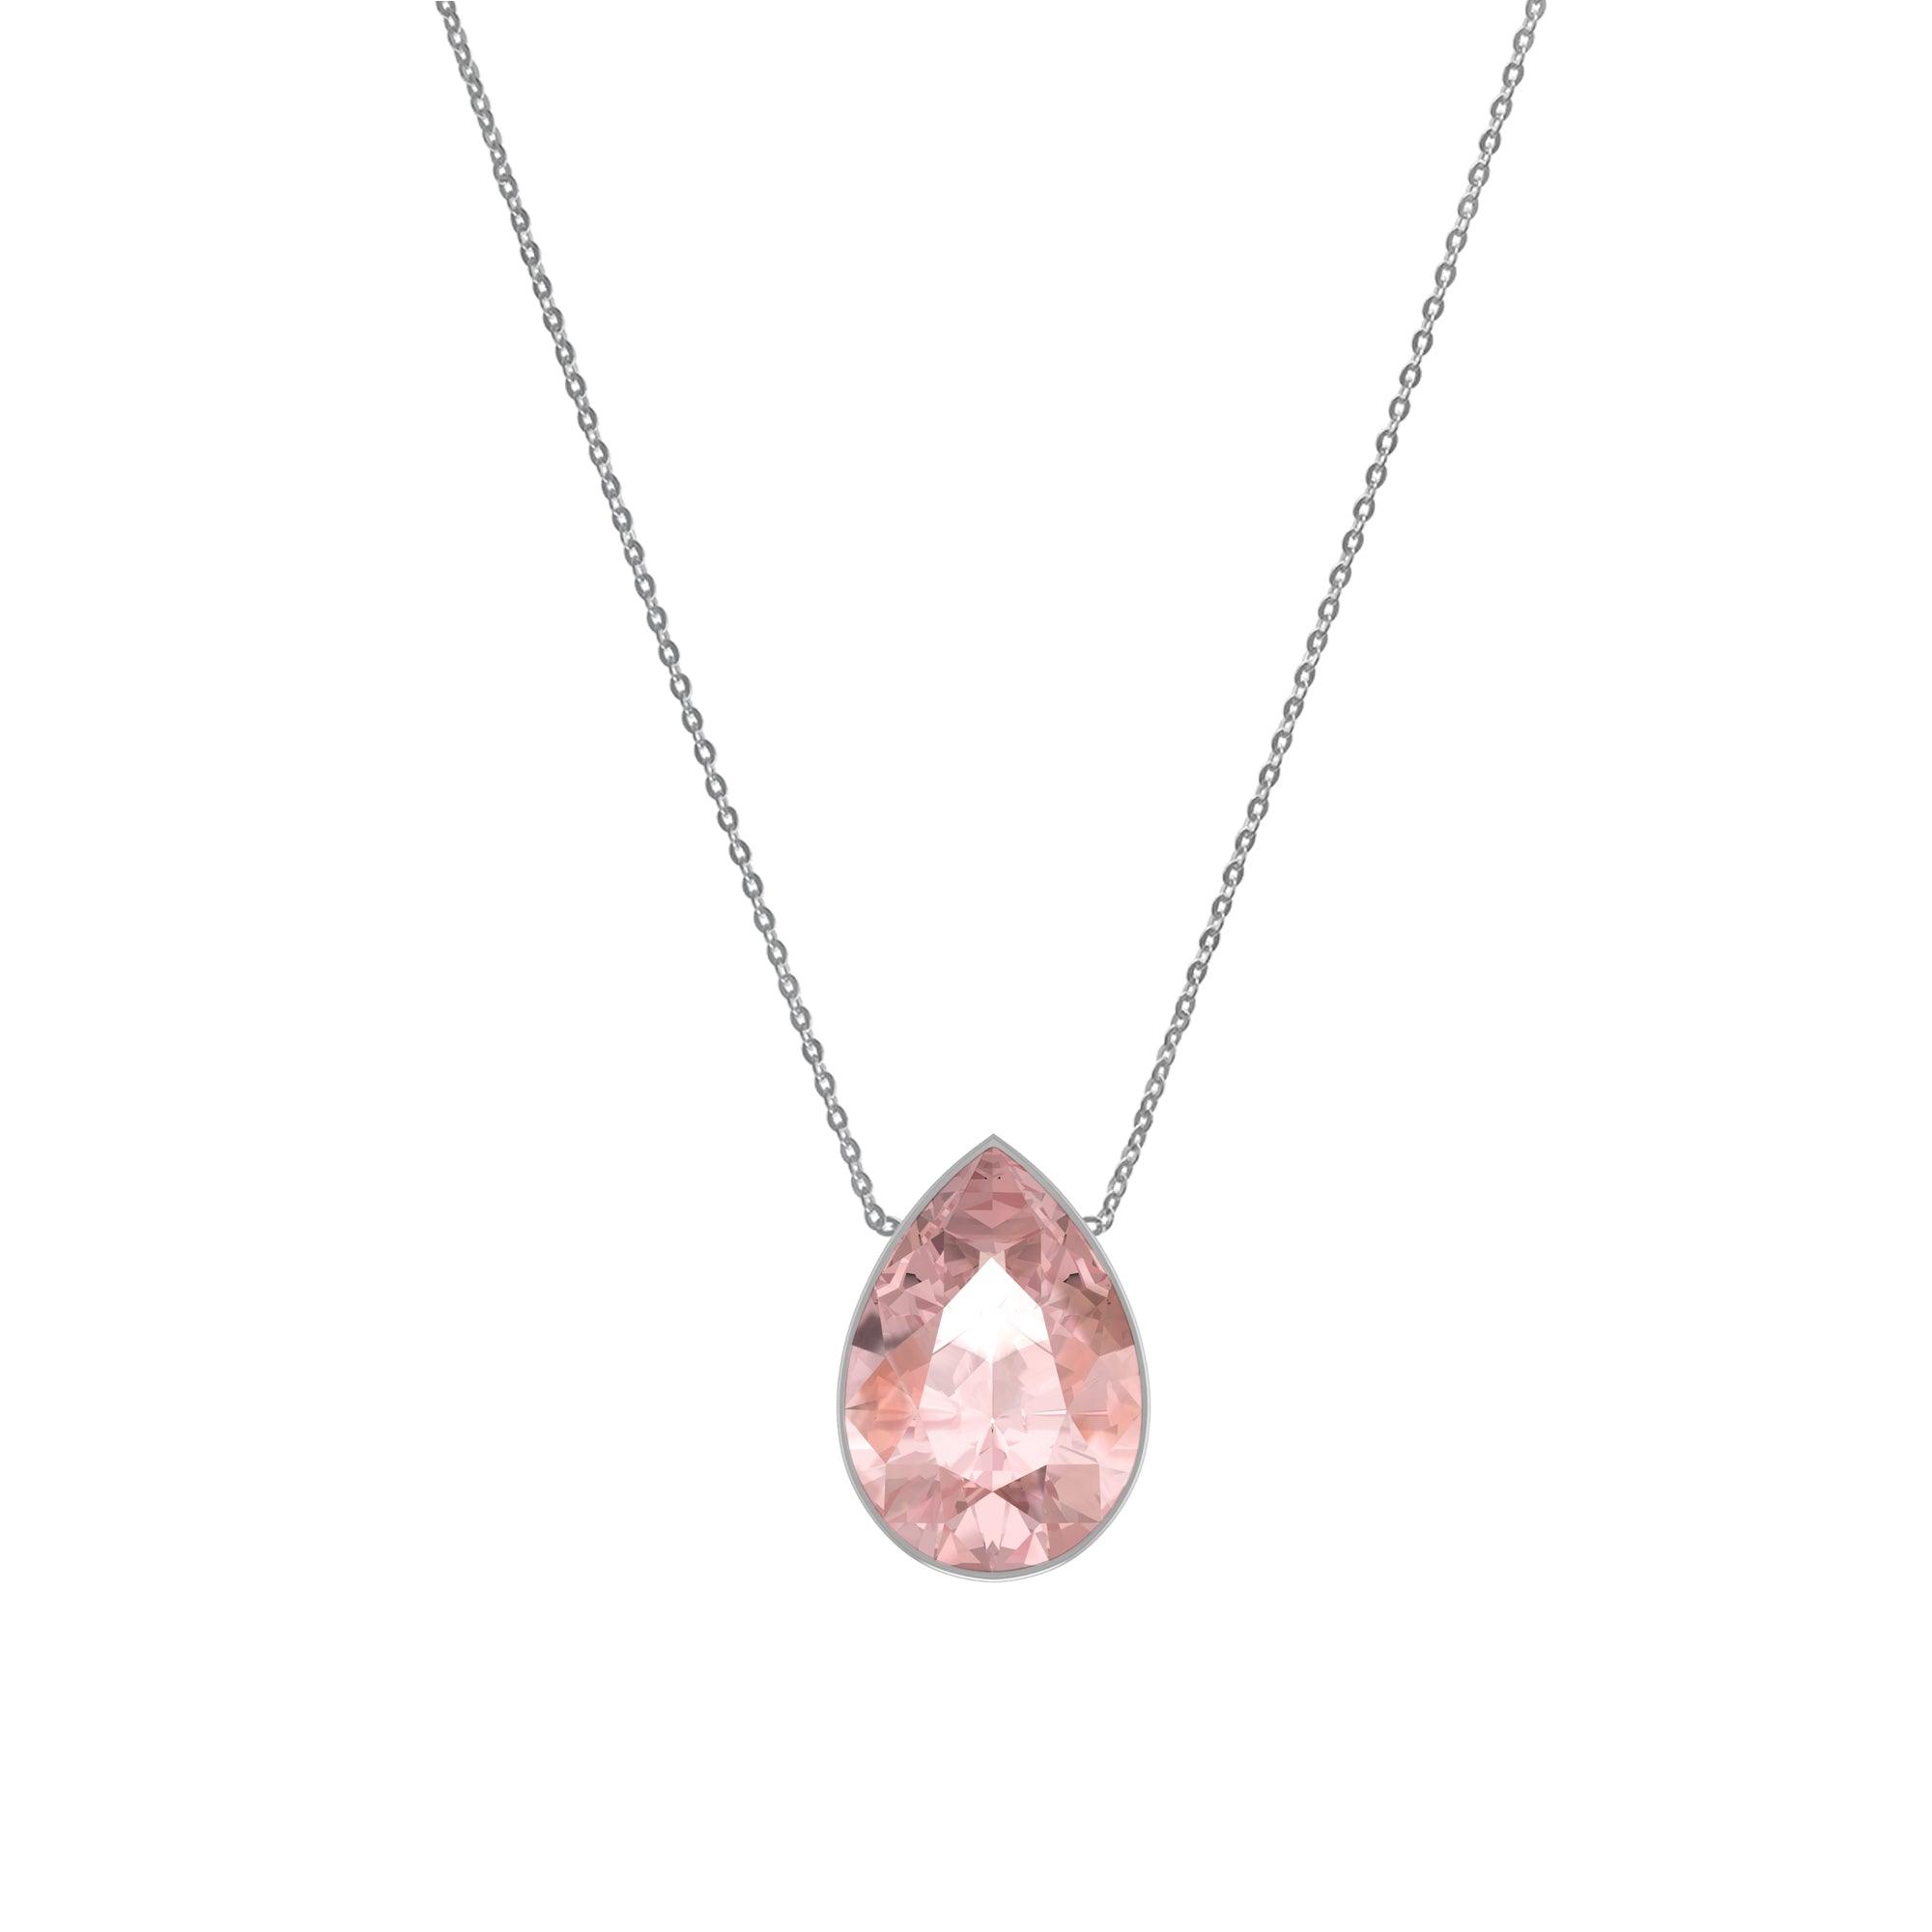 925 Sterling Silver Cut Morganite Slider Necklace With Chain 18" Bezel Set Jewelry Pack of 6